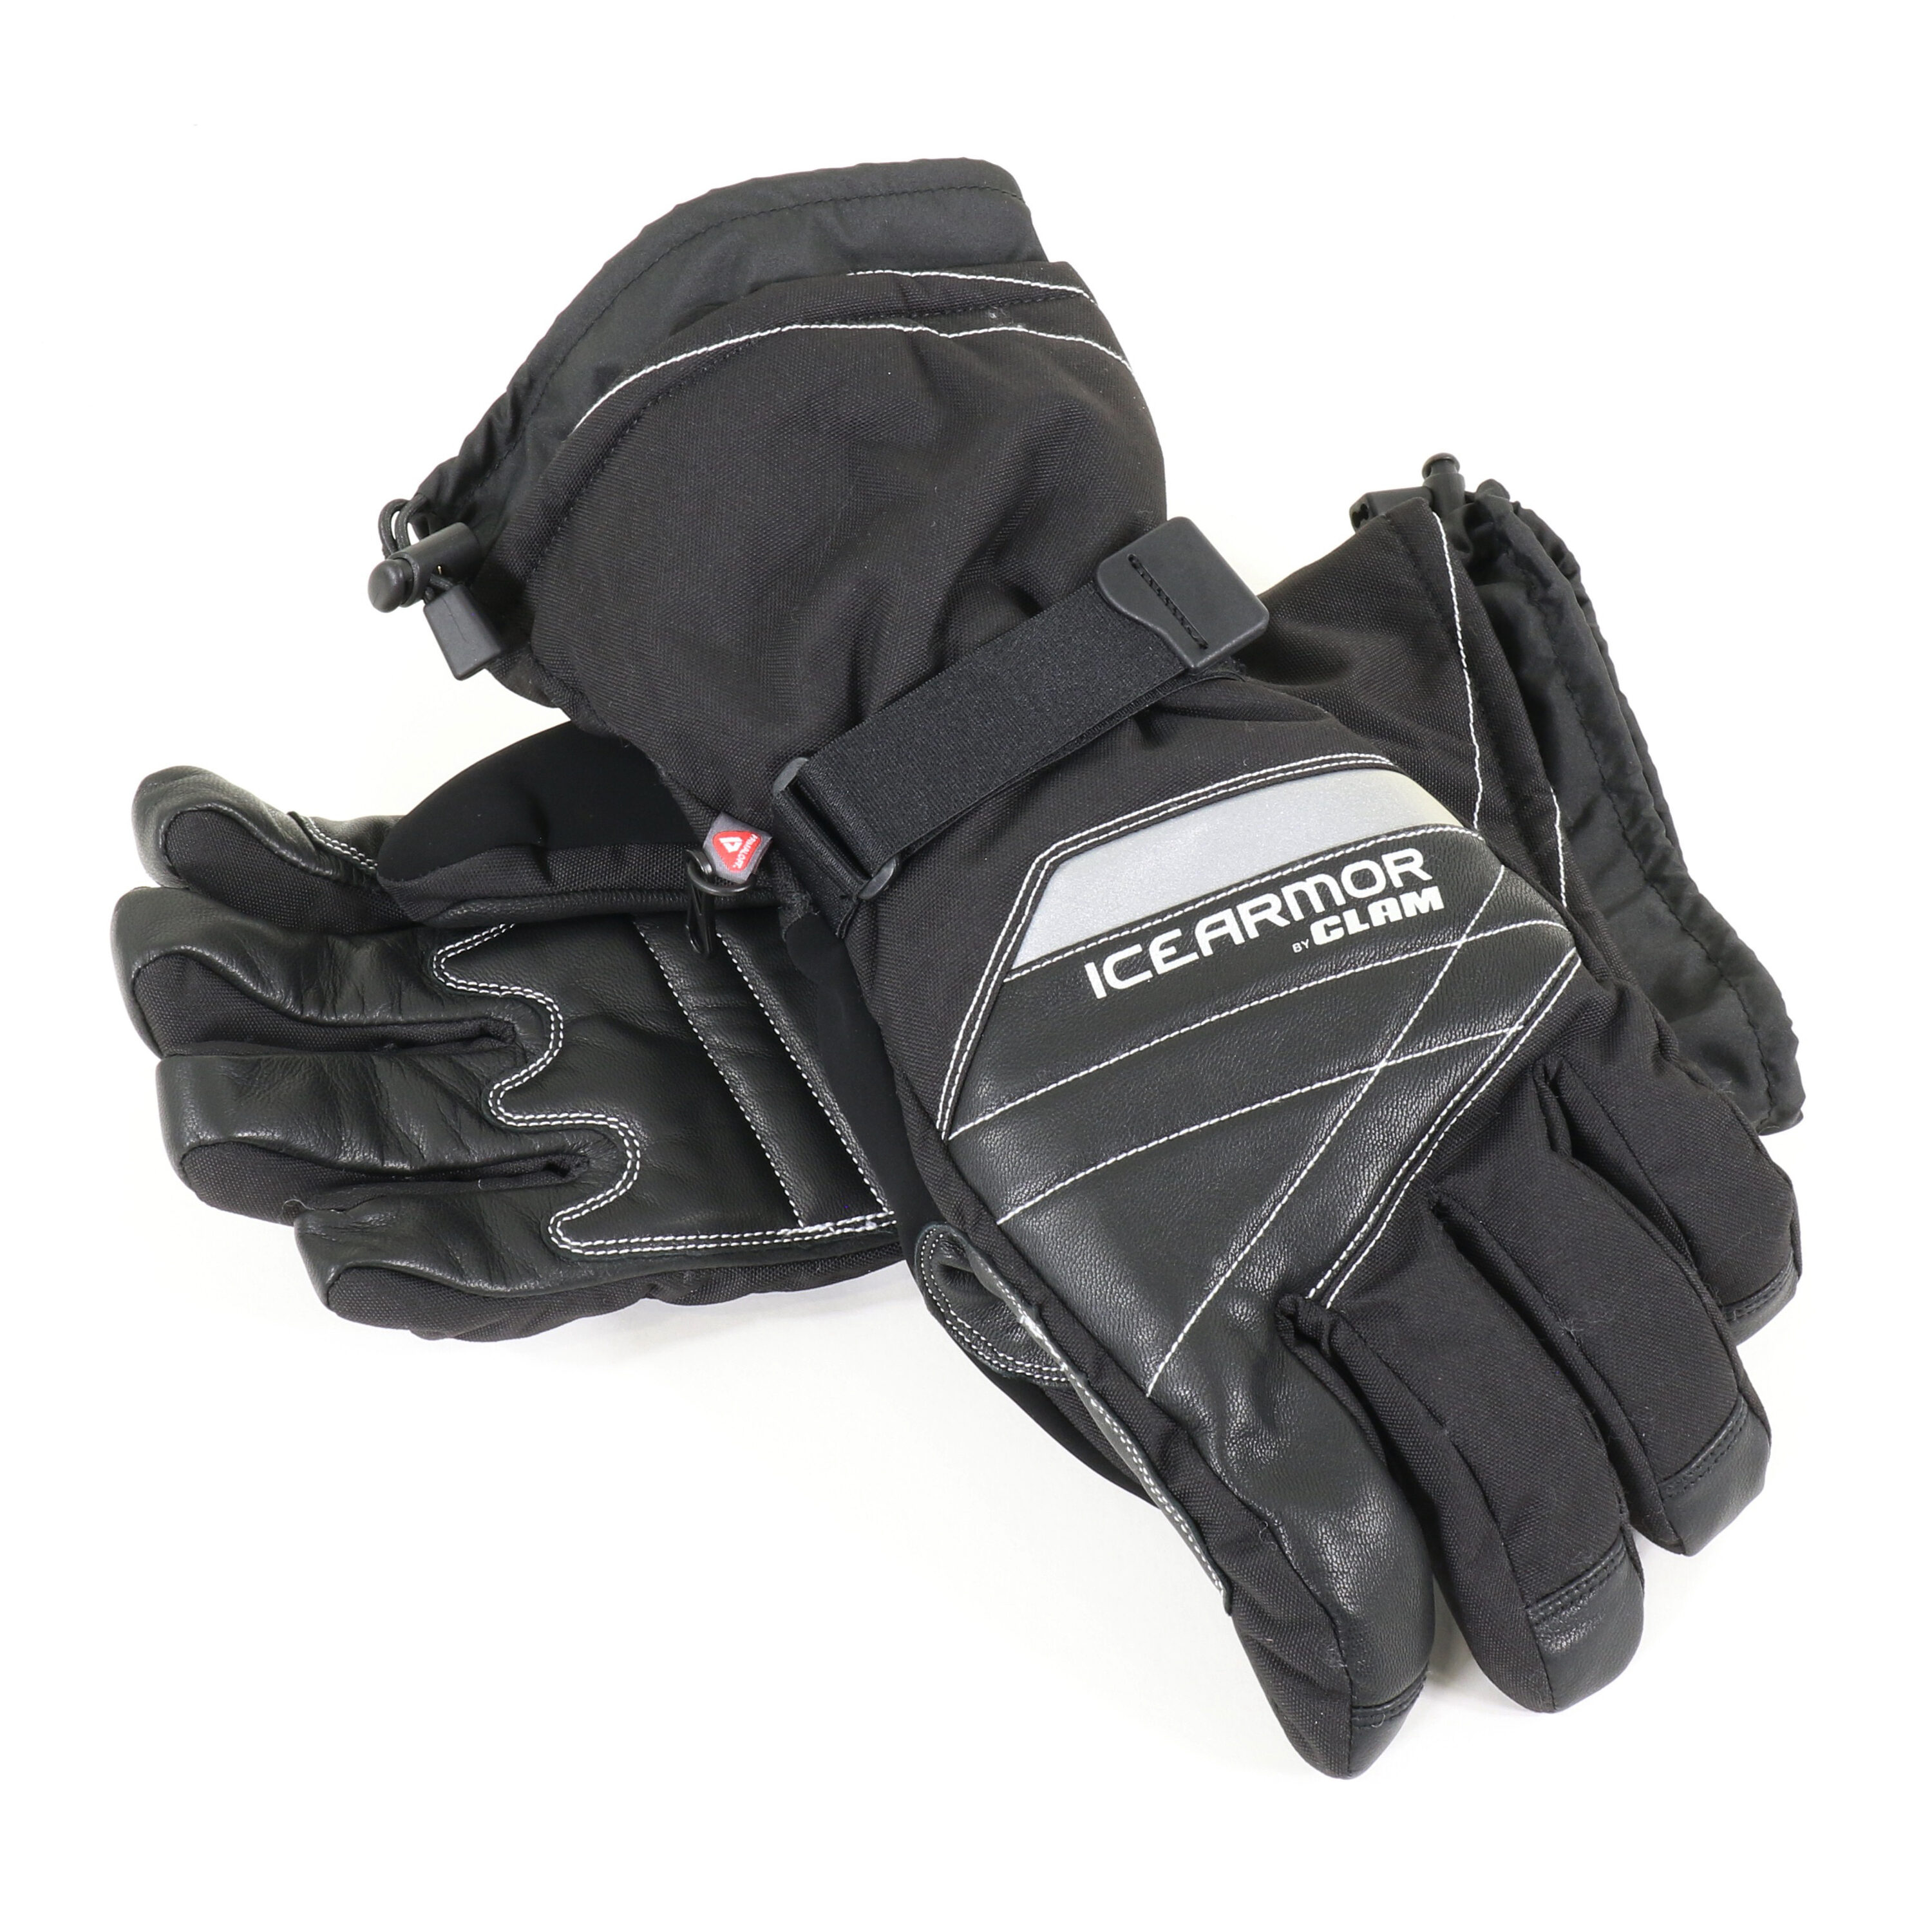 Clam Outdoors Renegade Ice Fishing Glove 2 Xlarge Black in the Fishing Gear  & Apparel department at